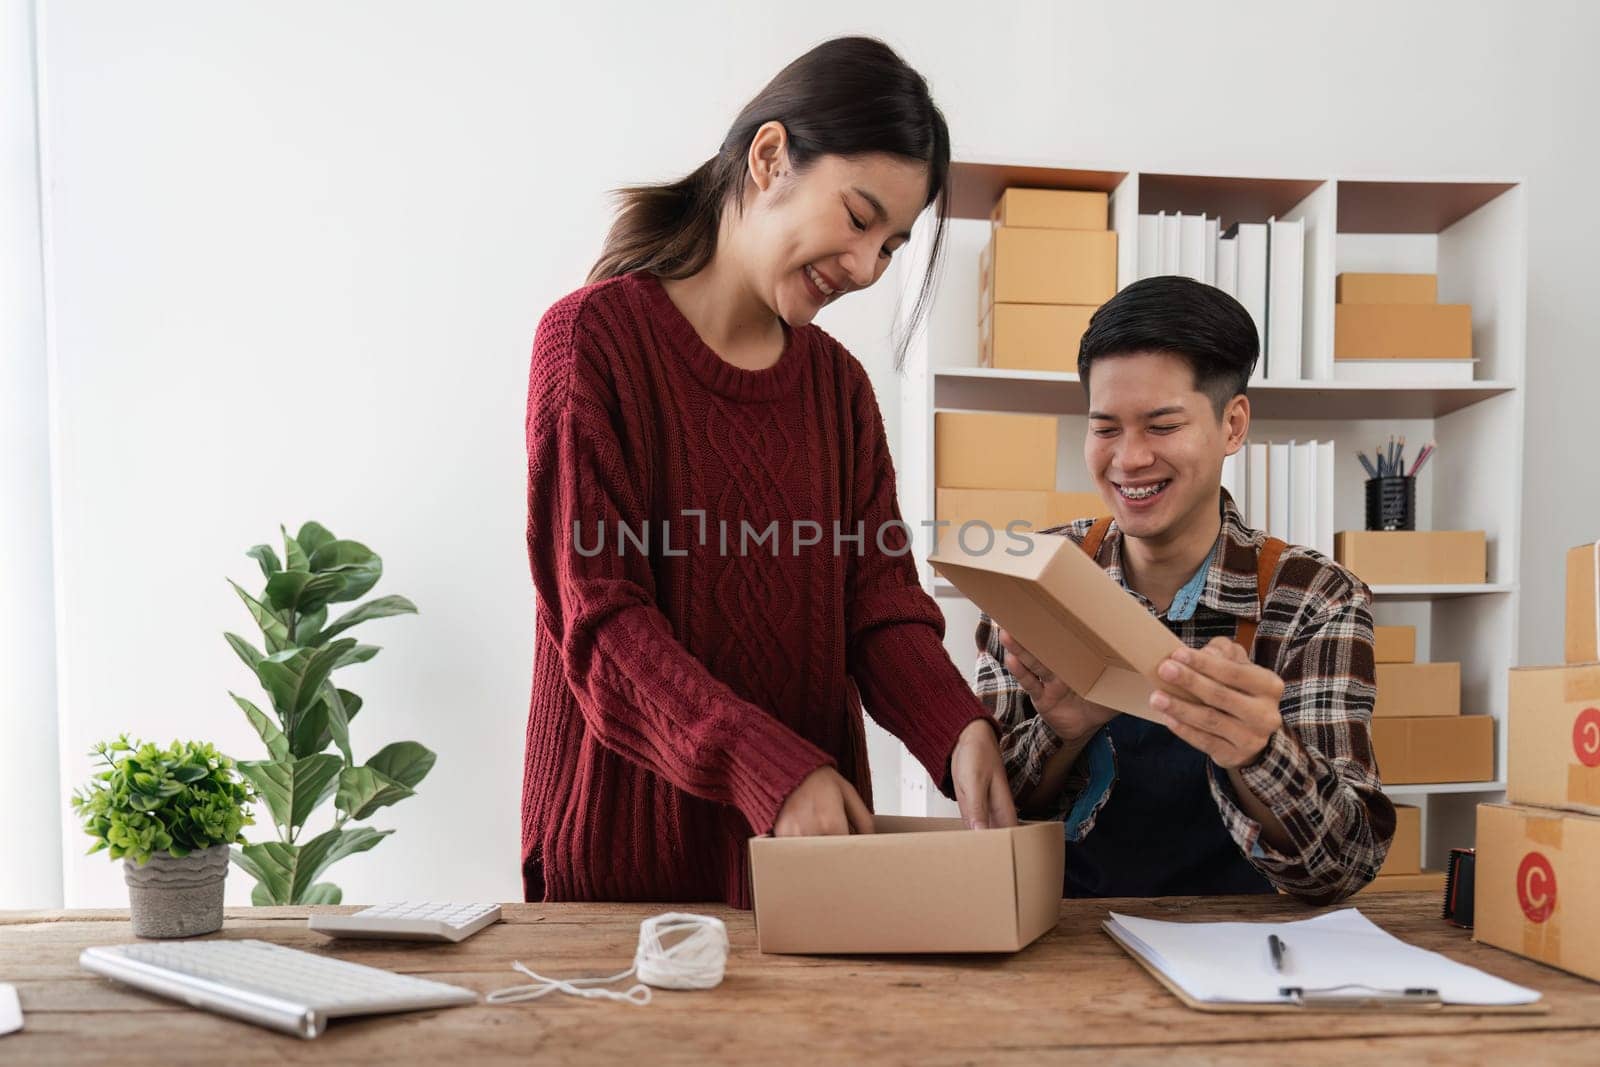 startup small business owner working with computer at workplace. freelance man and woman seller check product order, packing goods for delivery to customer. Online selling, e-commerce.